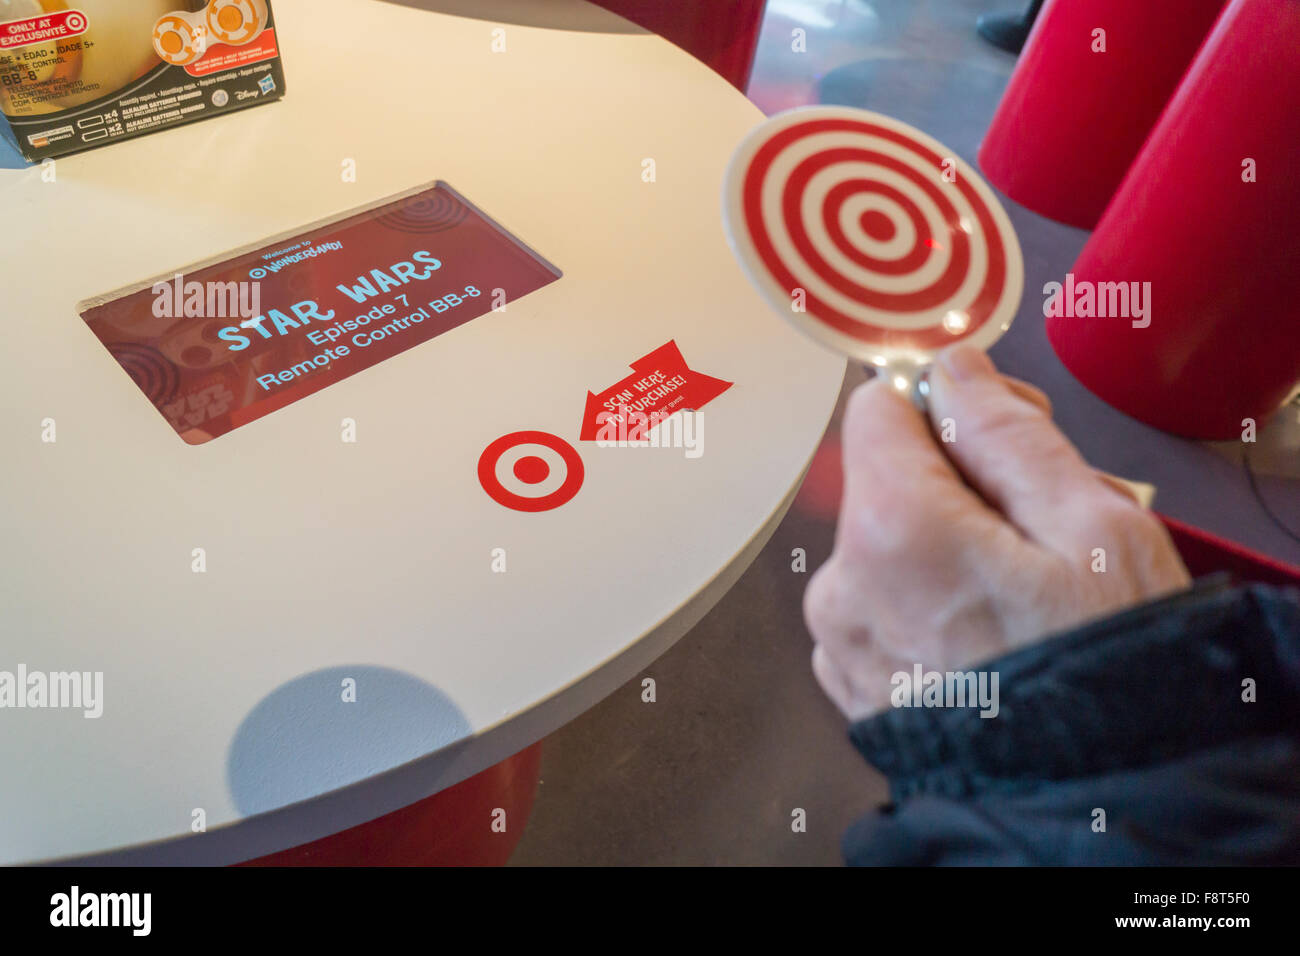 Etch A Sketch Freestyle : Target